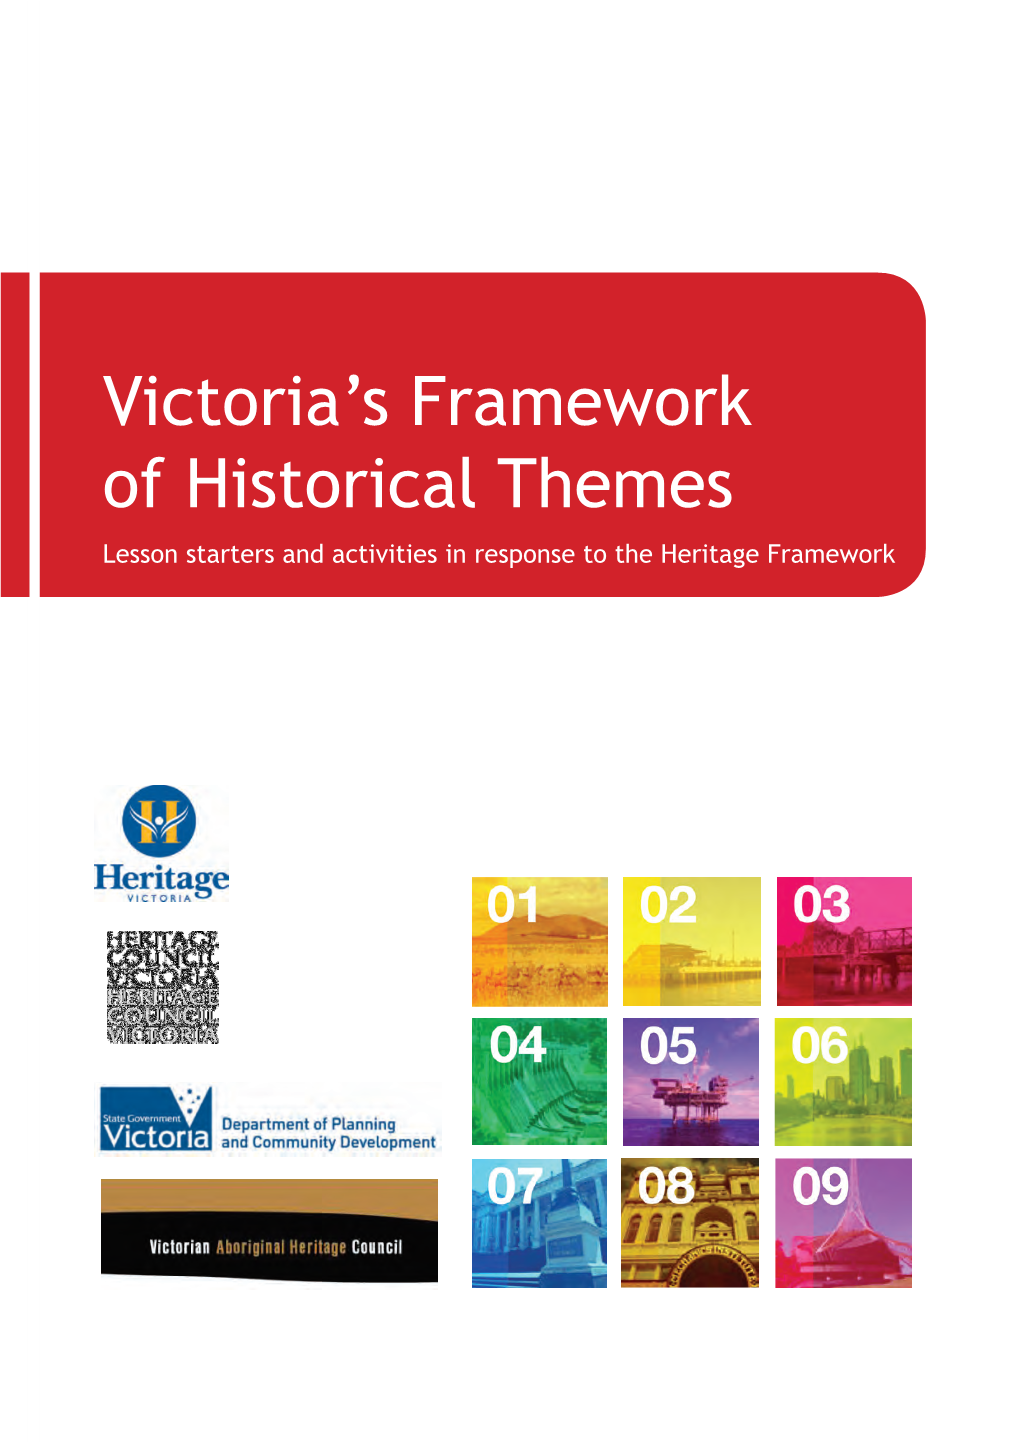 Victoria's Framework of Historical Themes